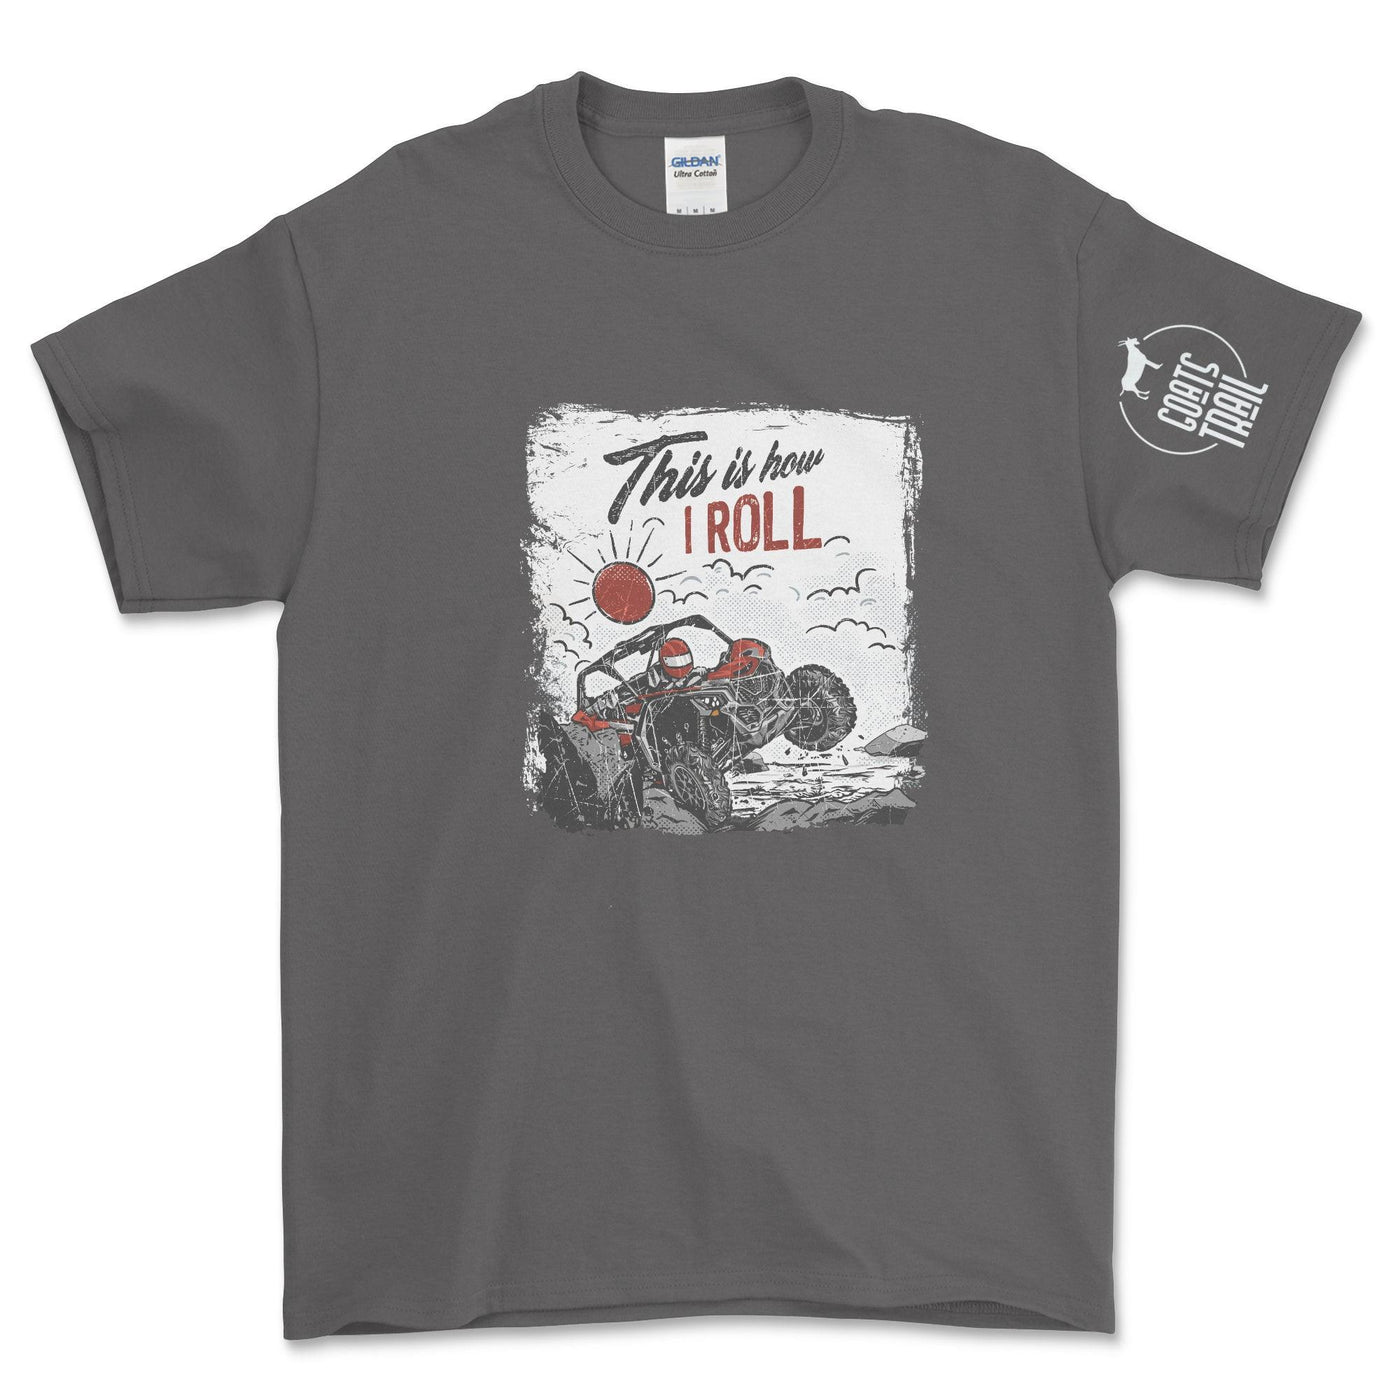 Big and Tall-SXS Graphic Tee - Goats Trail